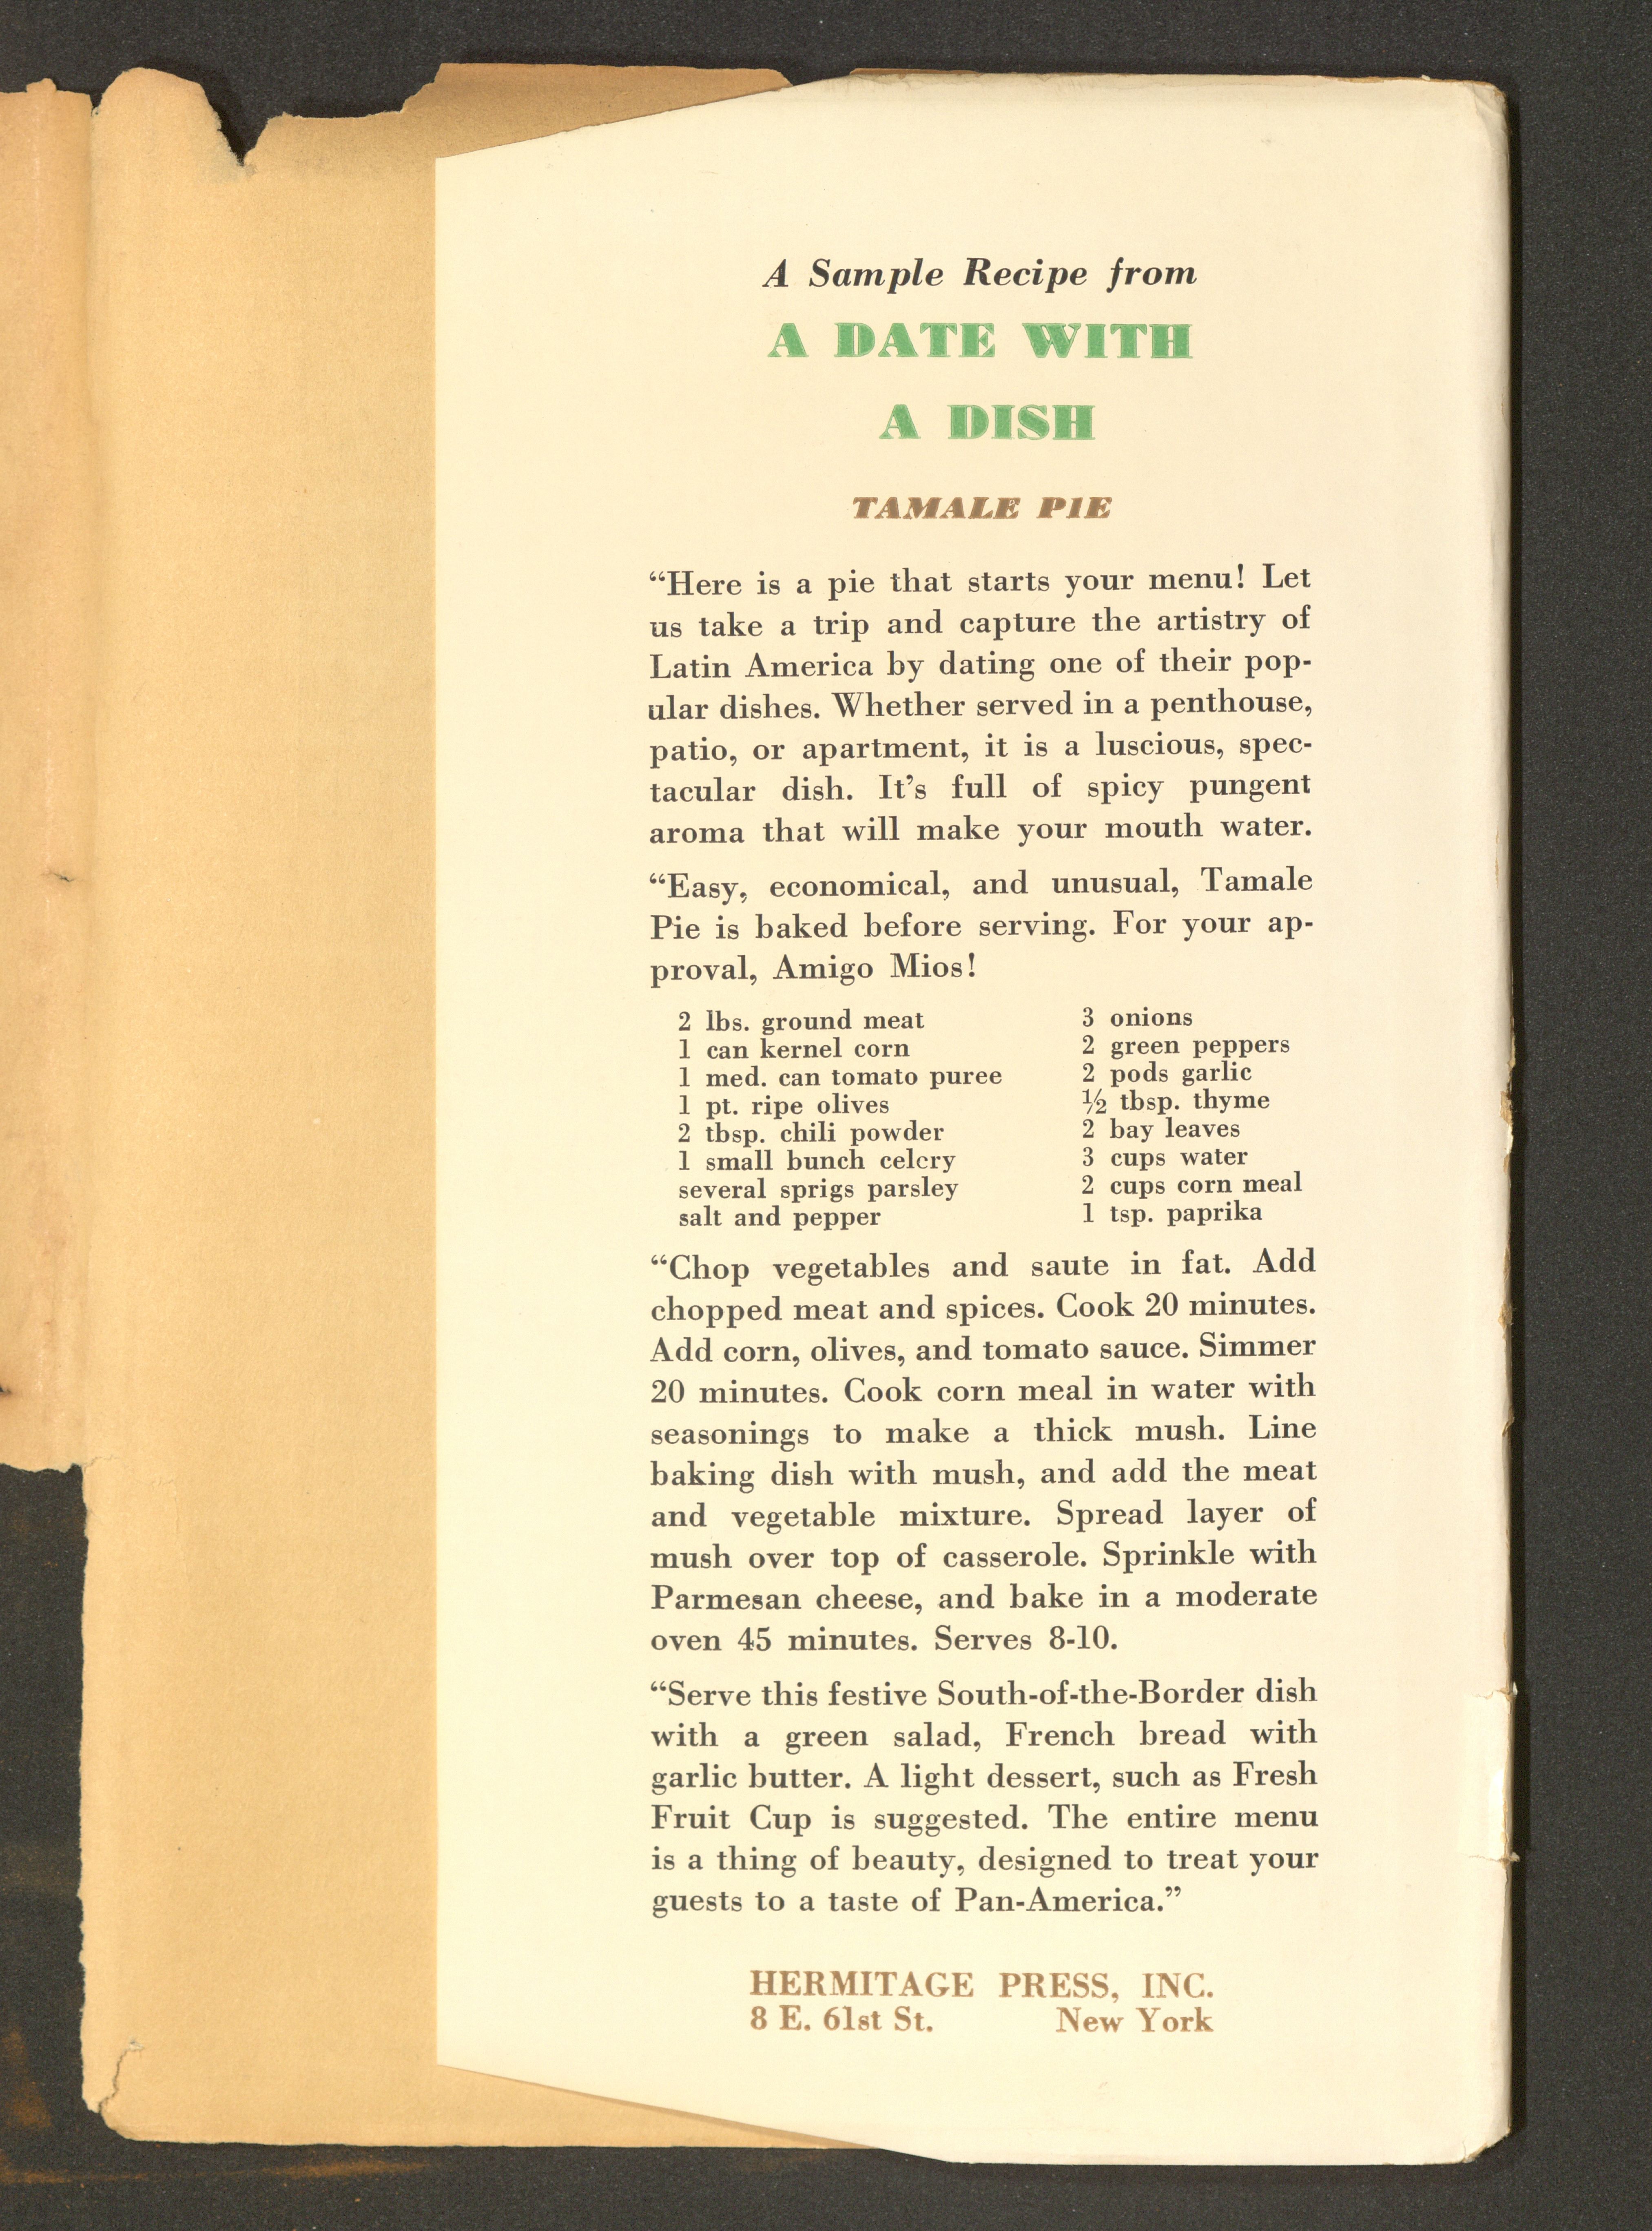 Dustjacket flap showing a sample recipe from A Date with a Dish for Tamale Pie